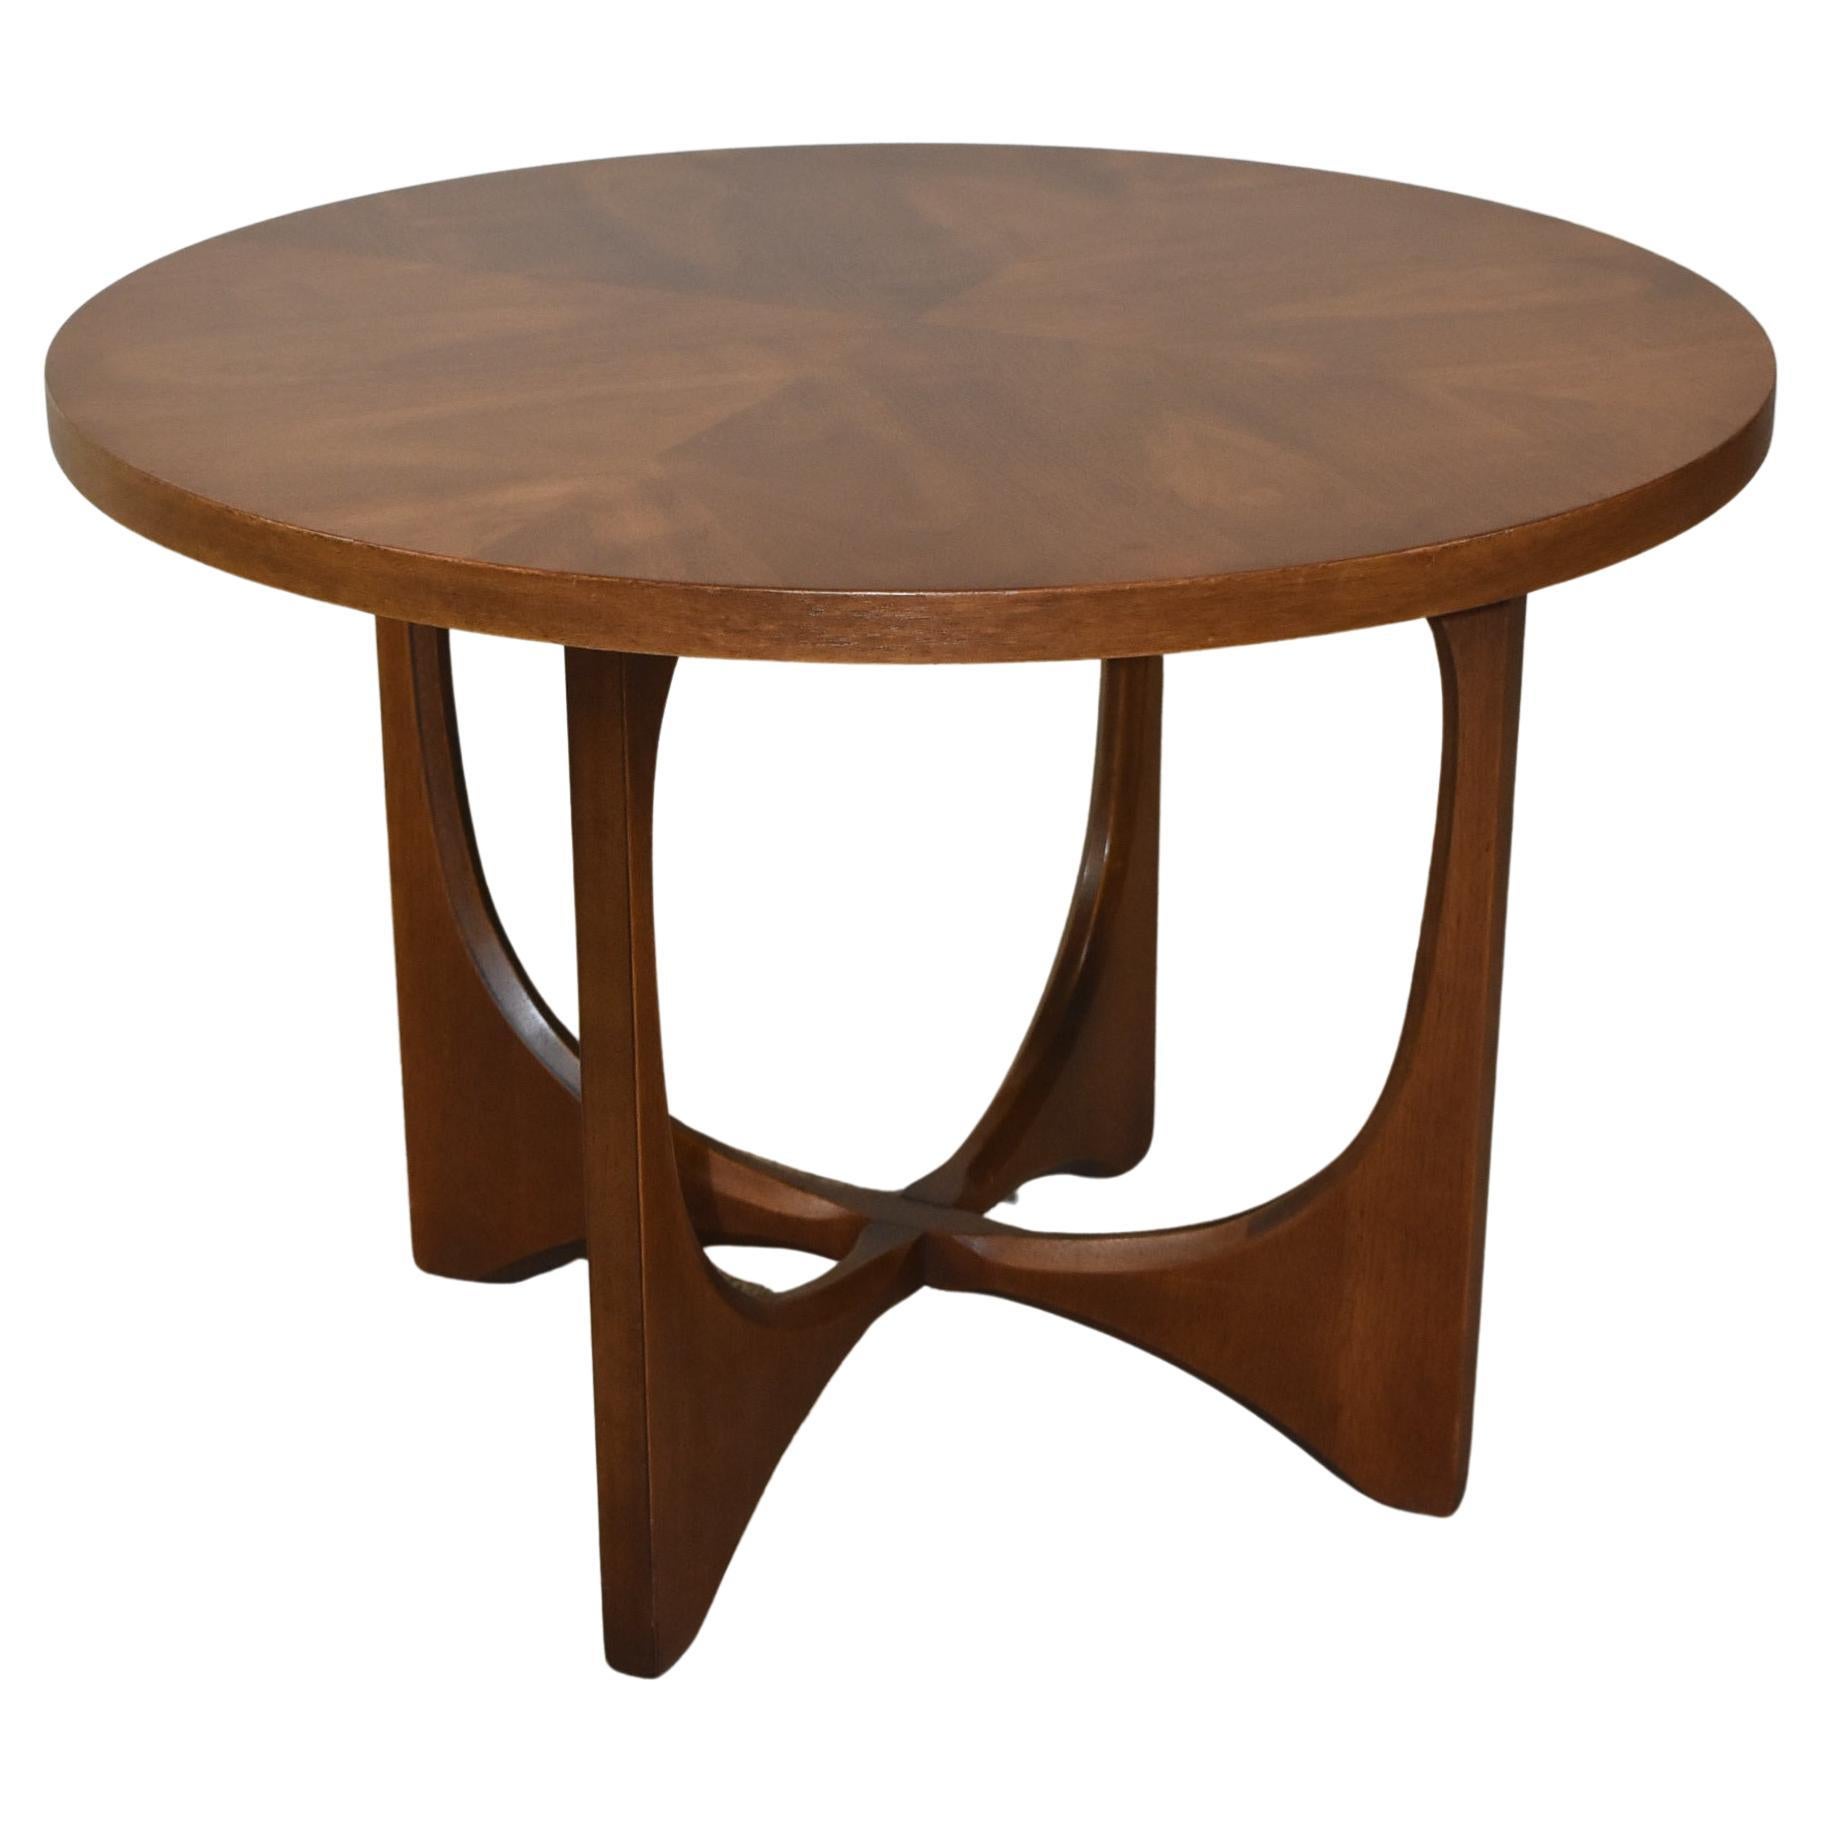 Table d'appoint ronde Broyhill Brasilia